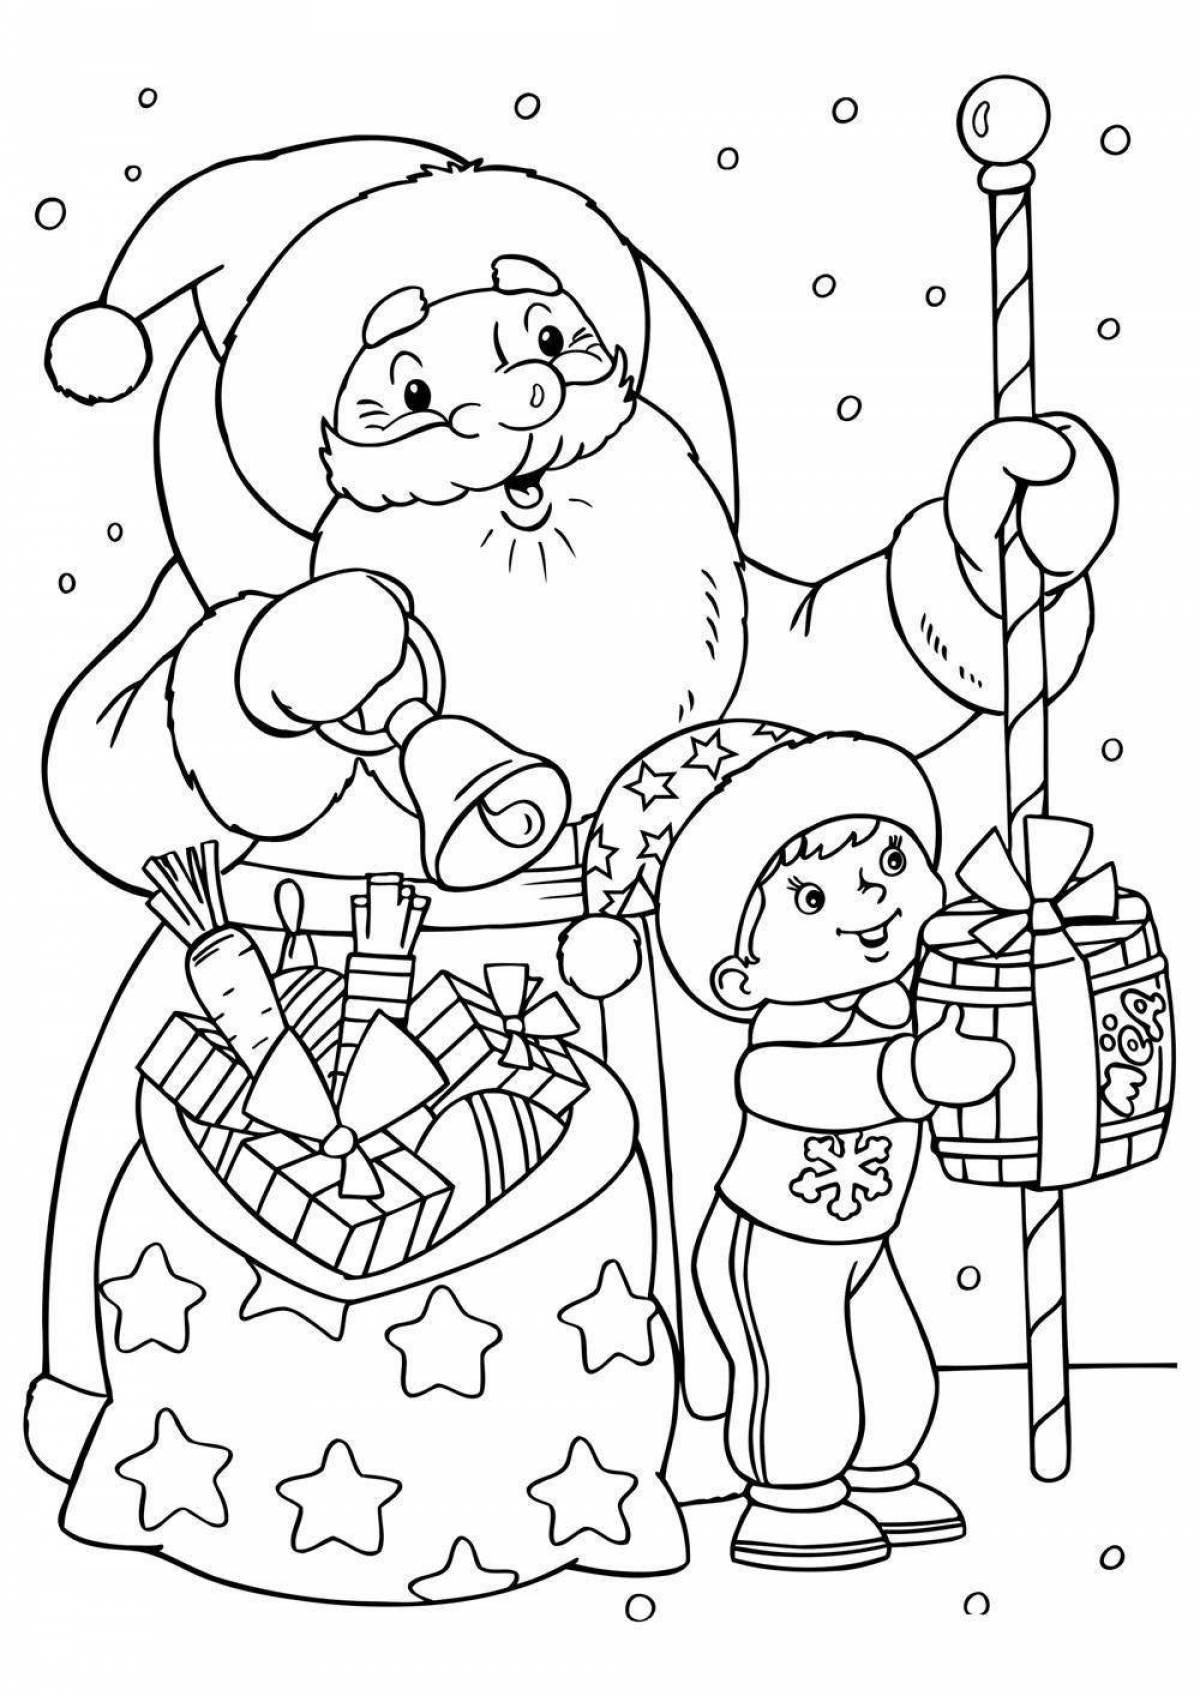 Exciting happy new year coloring book